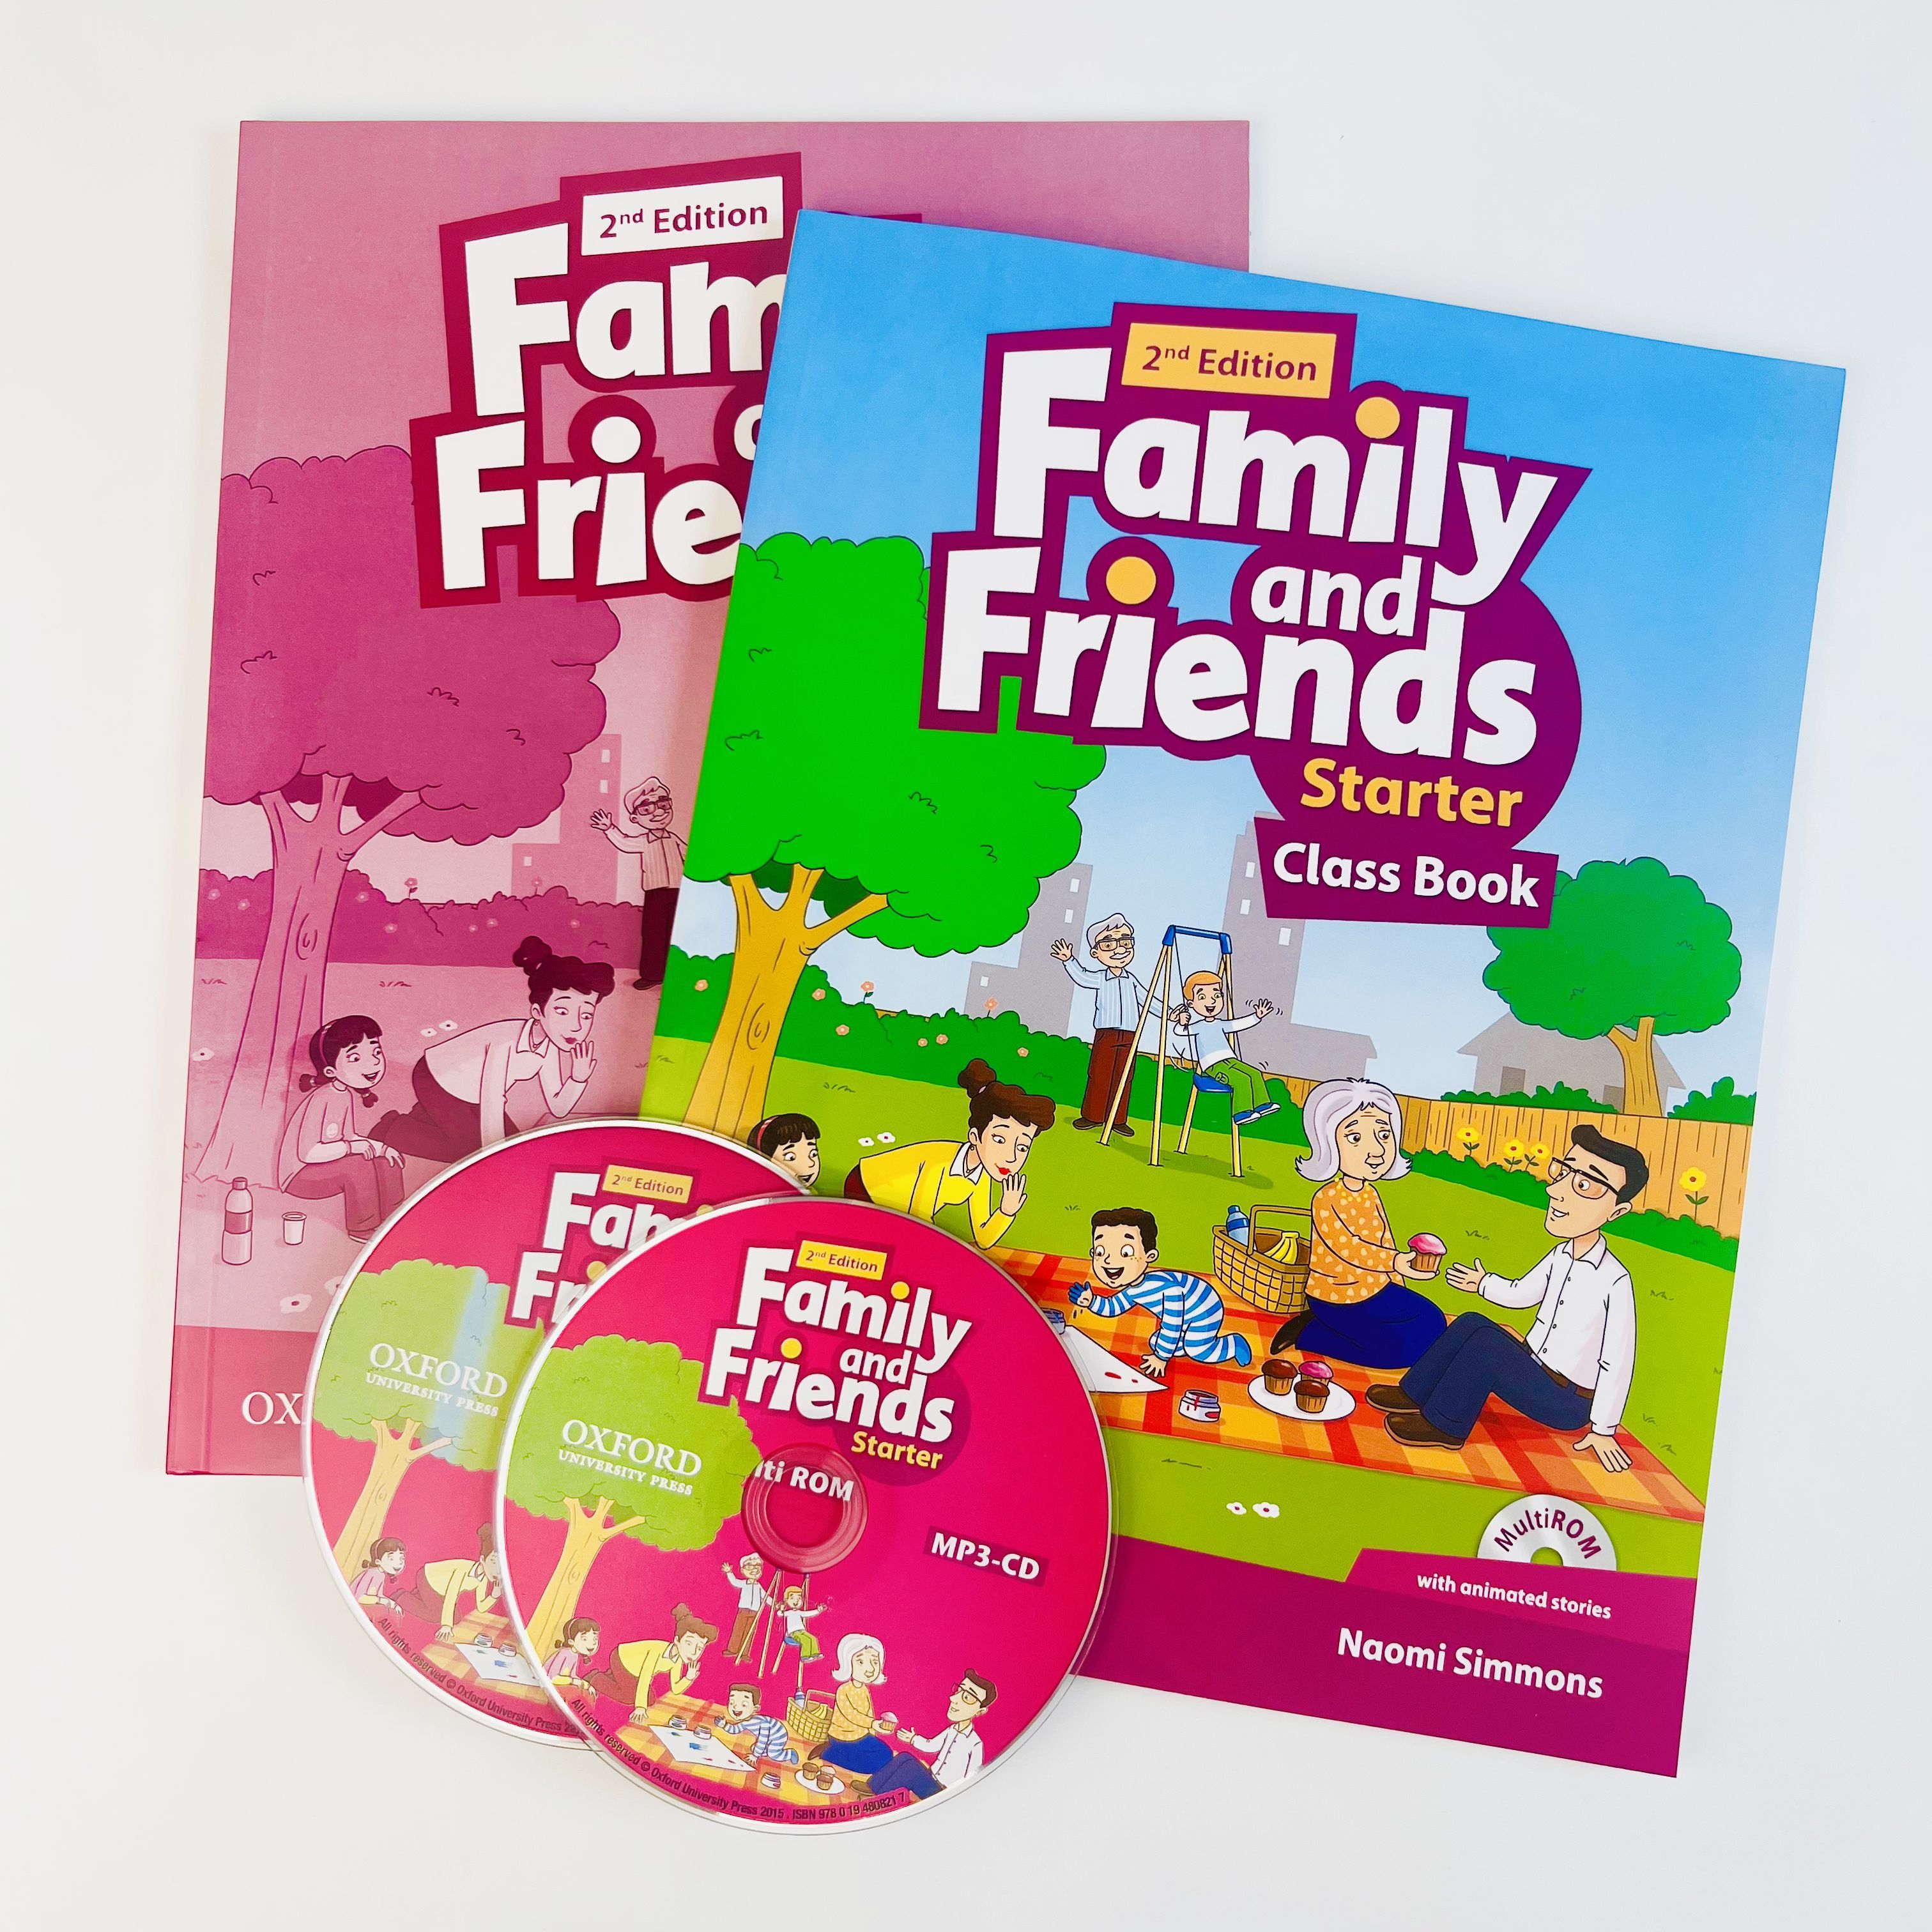 Friends starter book. Family and friends: Starter. Family and friends Starter class book. Starter учебник. Family and friends 1 Starter.